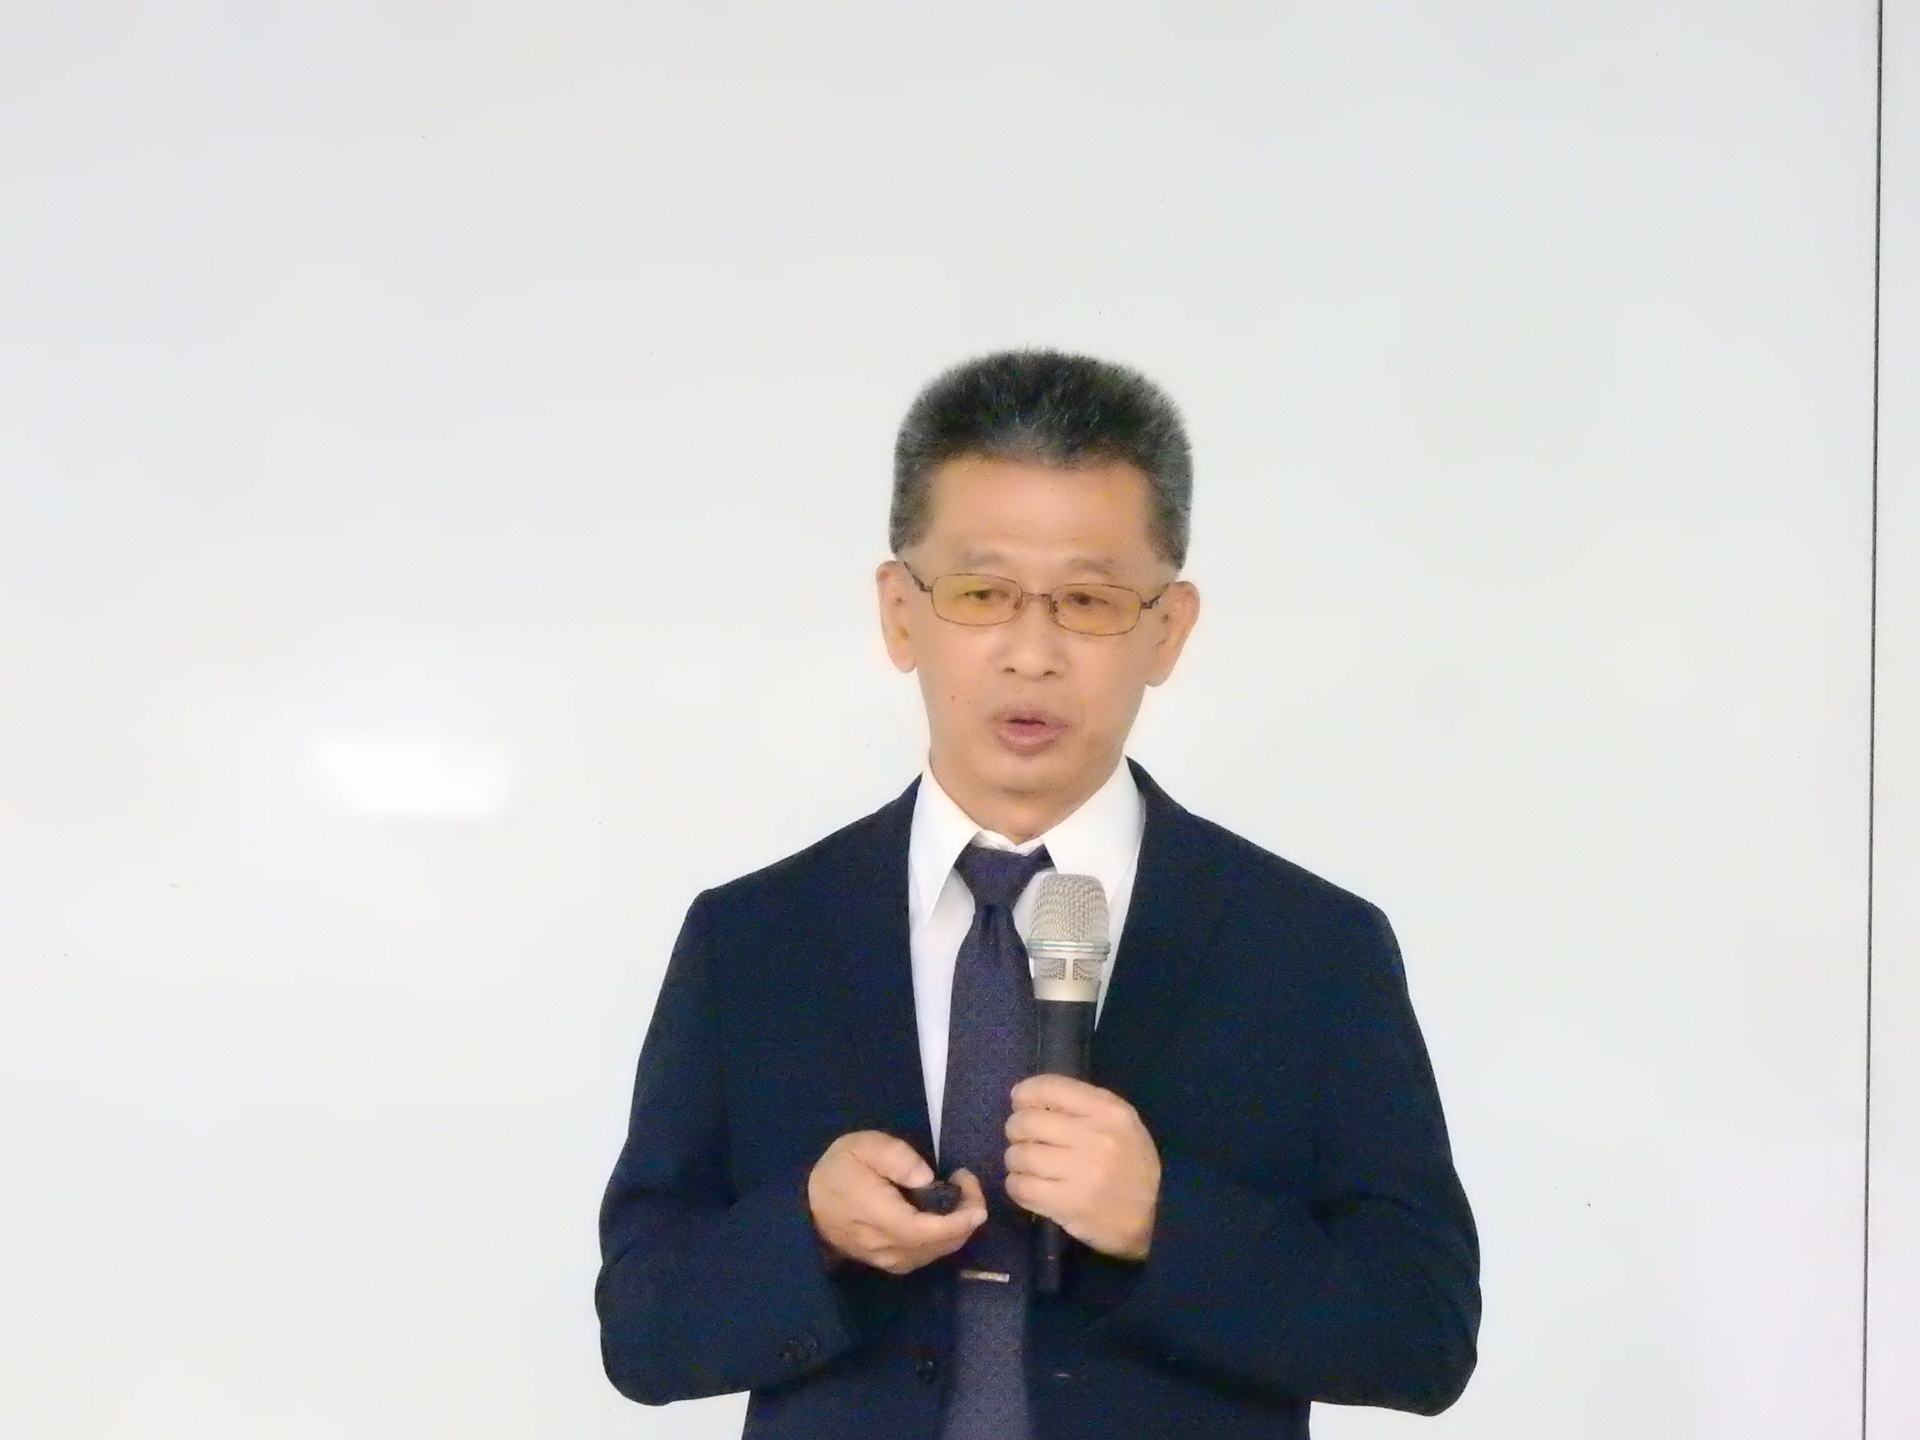 Prof. Jiukun Kuo, Associate Dean of College of Management, presents